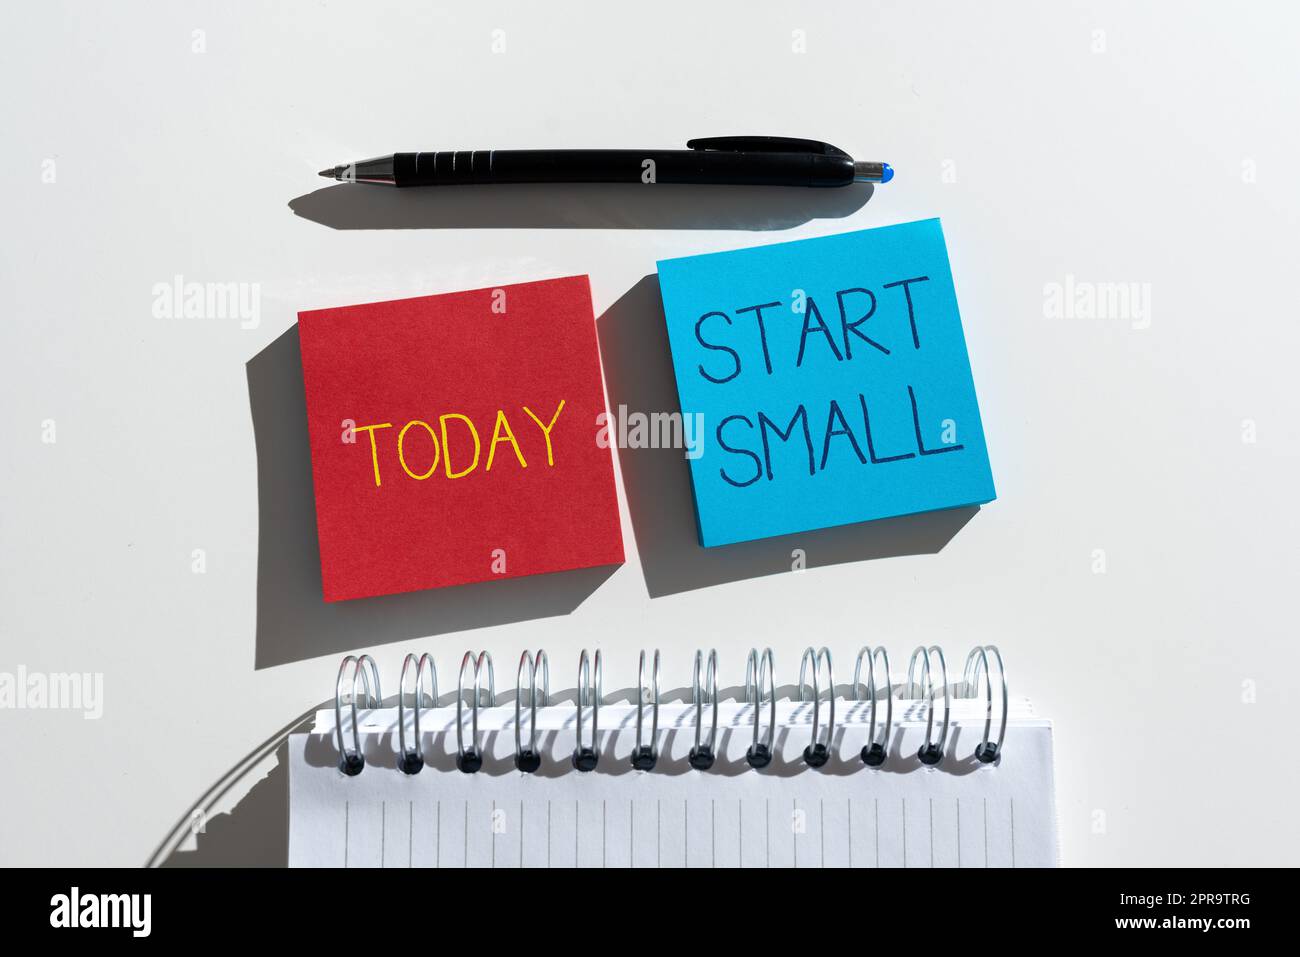 Text caption presenting Start Small. Business idea Small medium enterprises start up Business entrepreneurship Important Messages Written On Two Notes On Desk With Pen And Notebook. Stock Photo